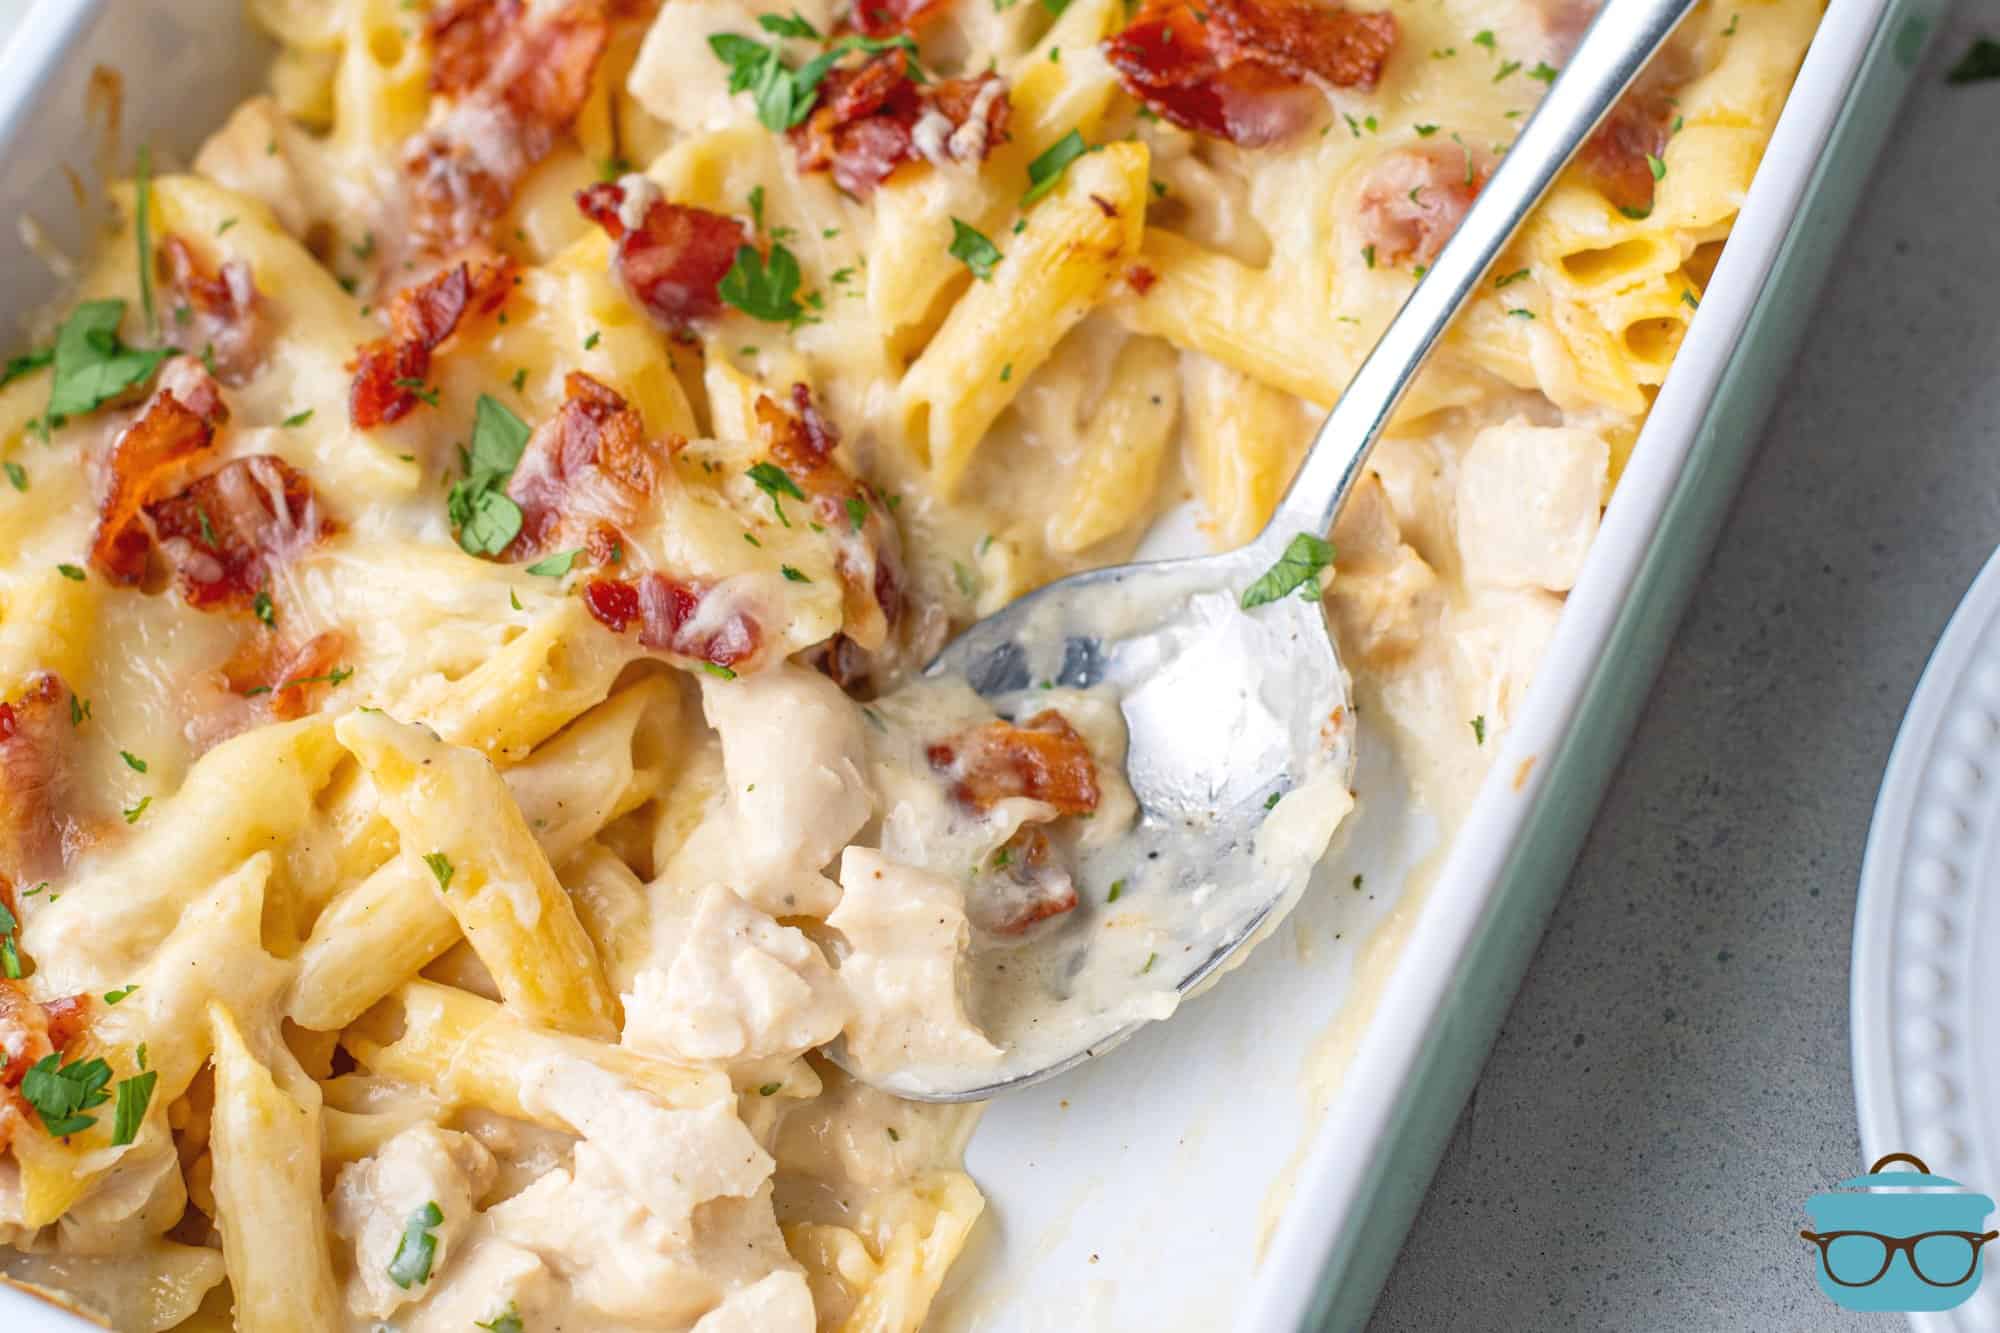 fully baked chicken bacon ranch casserole in a baking dish with a silver serving spoon.